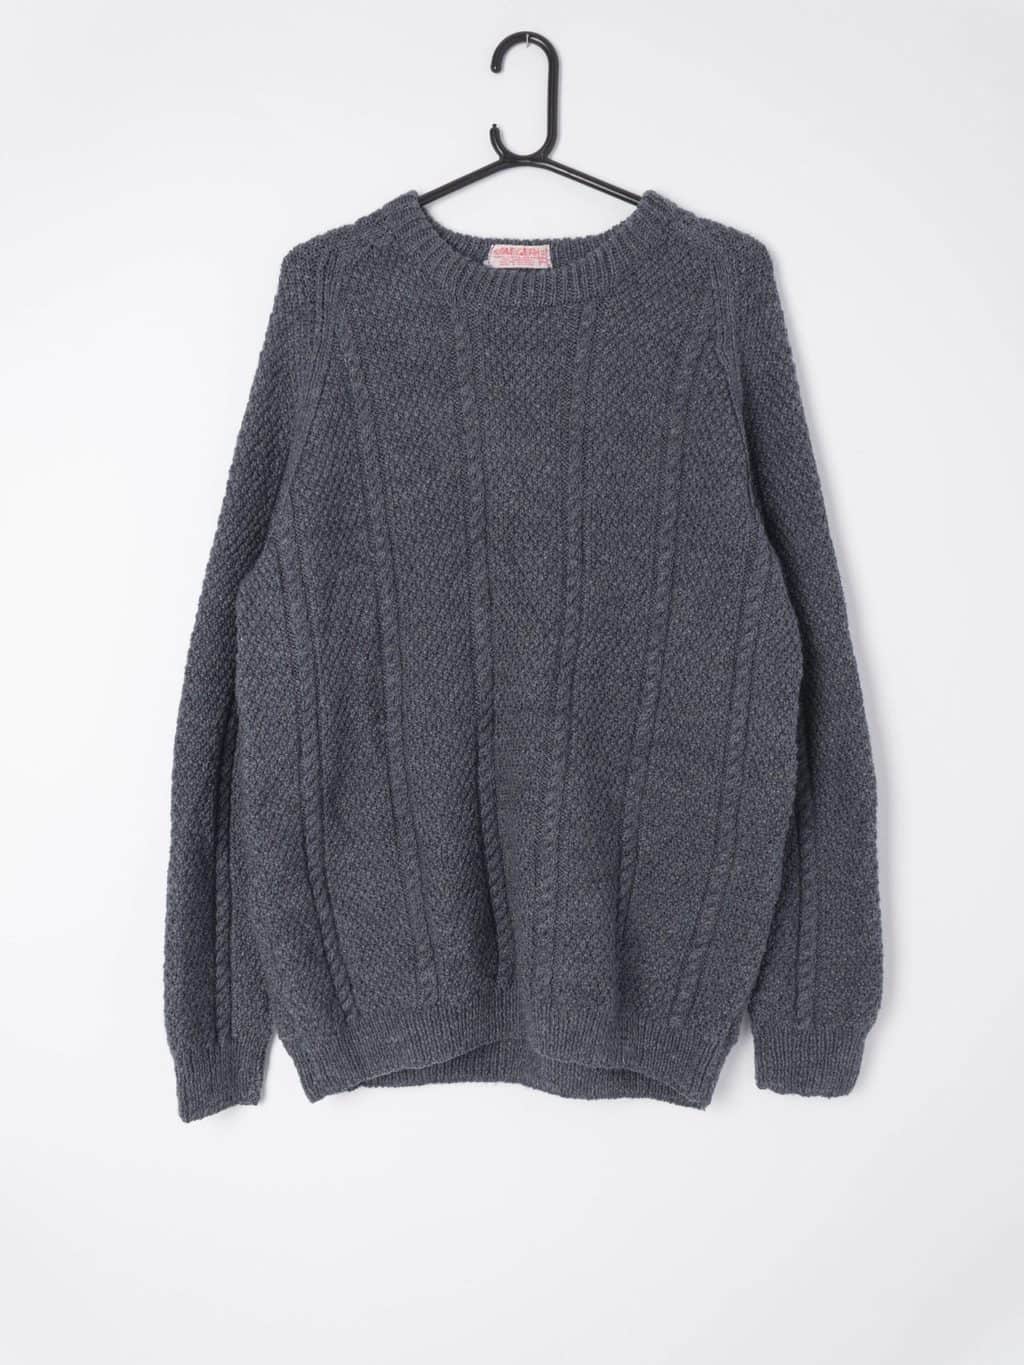 Vintage Jaeger cable knit fisherman style lambswool jumper in dark ...